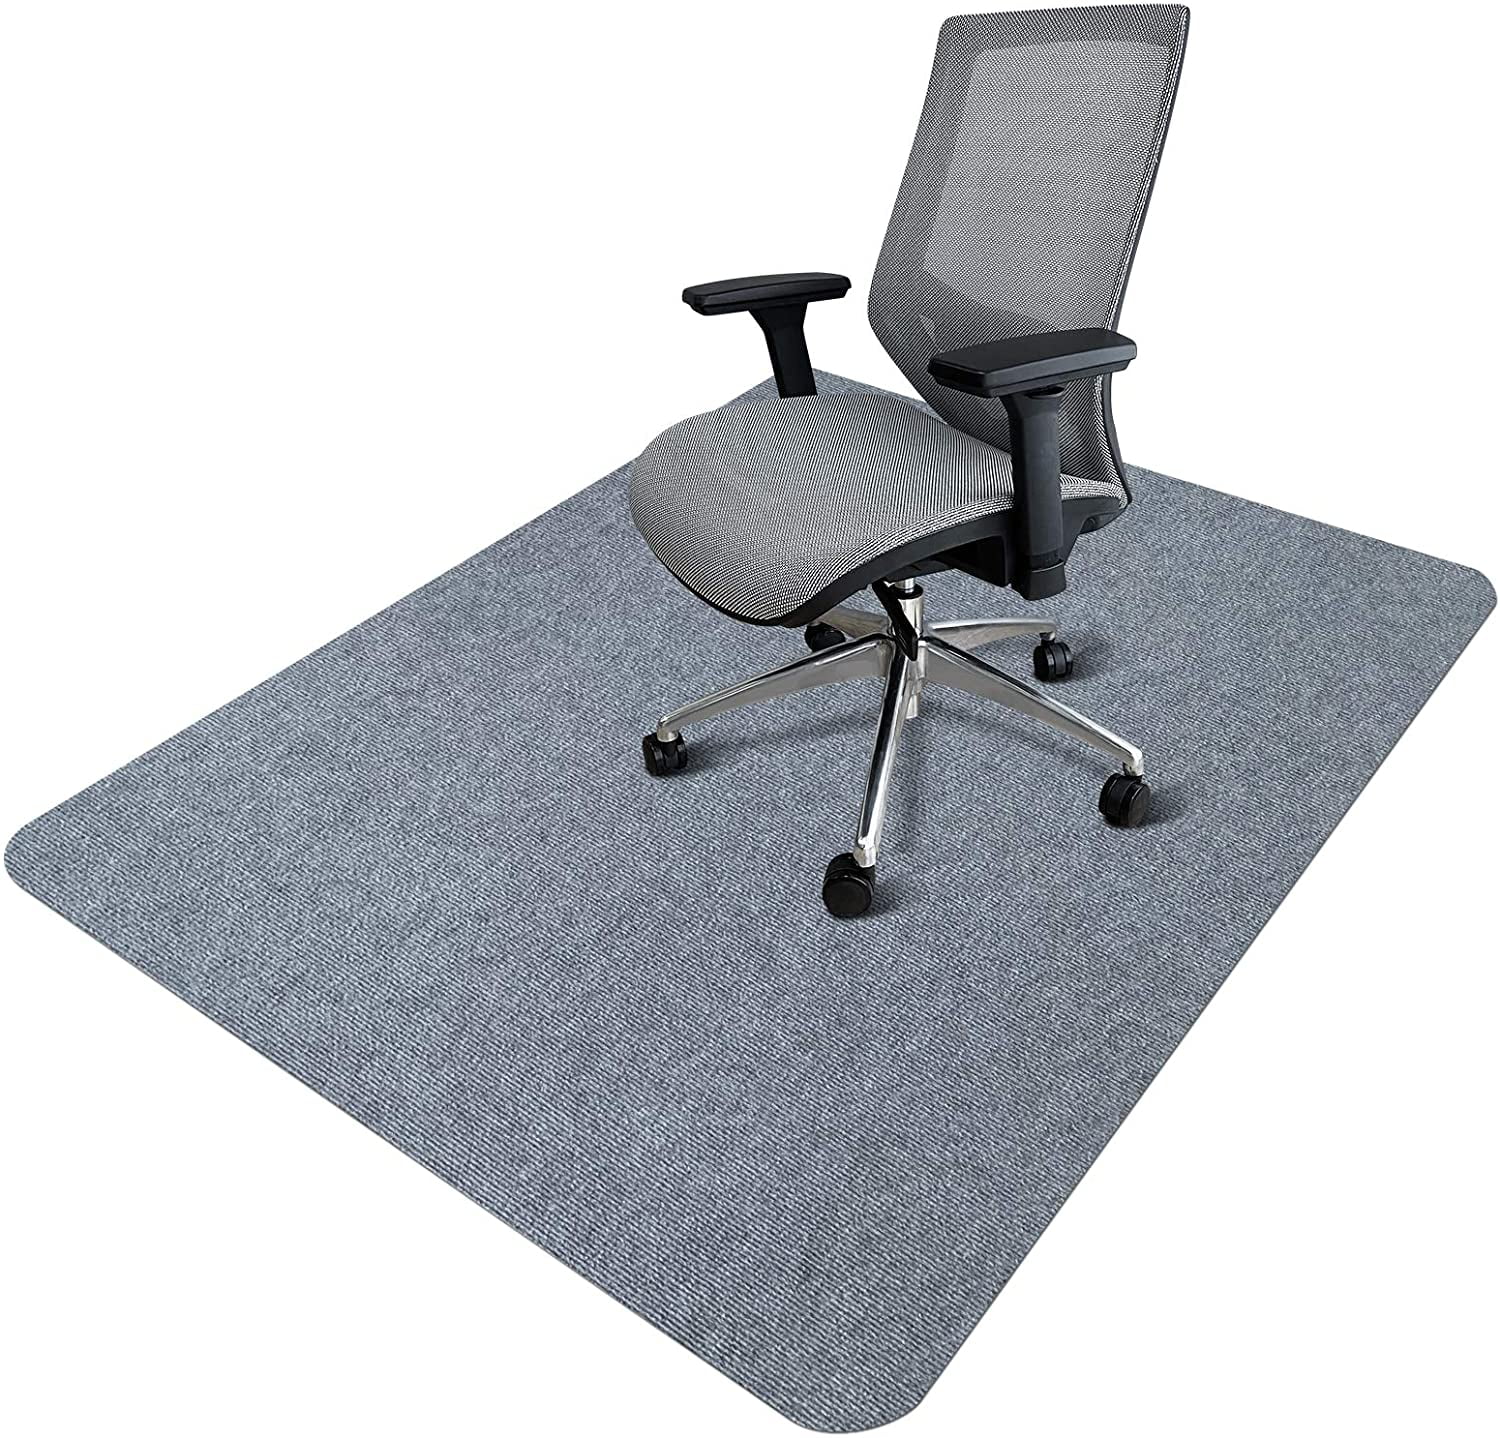 Simple Desk Chair Mat Walmart with Simple Decor